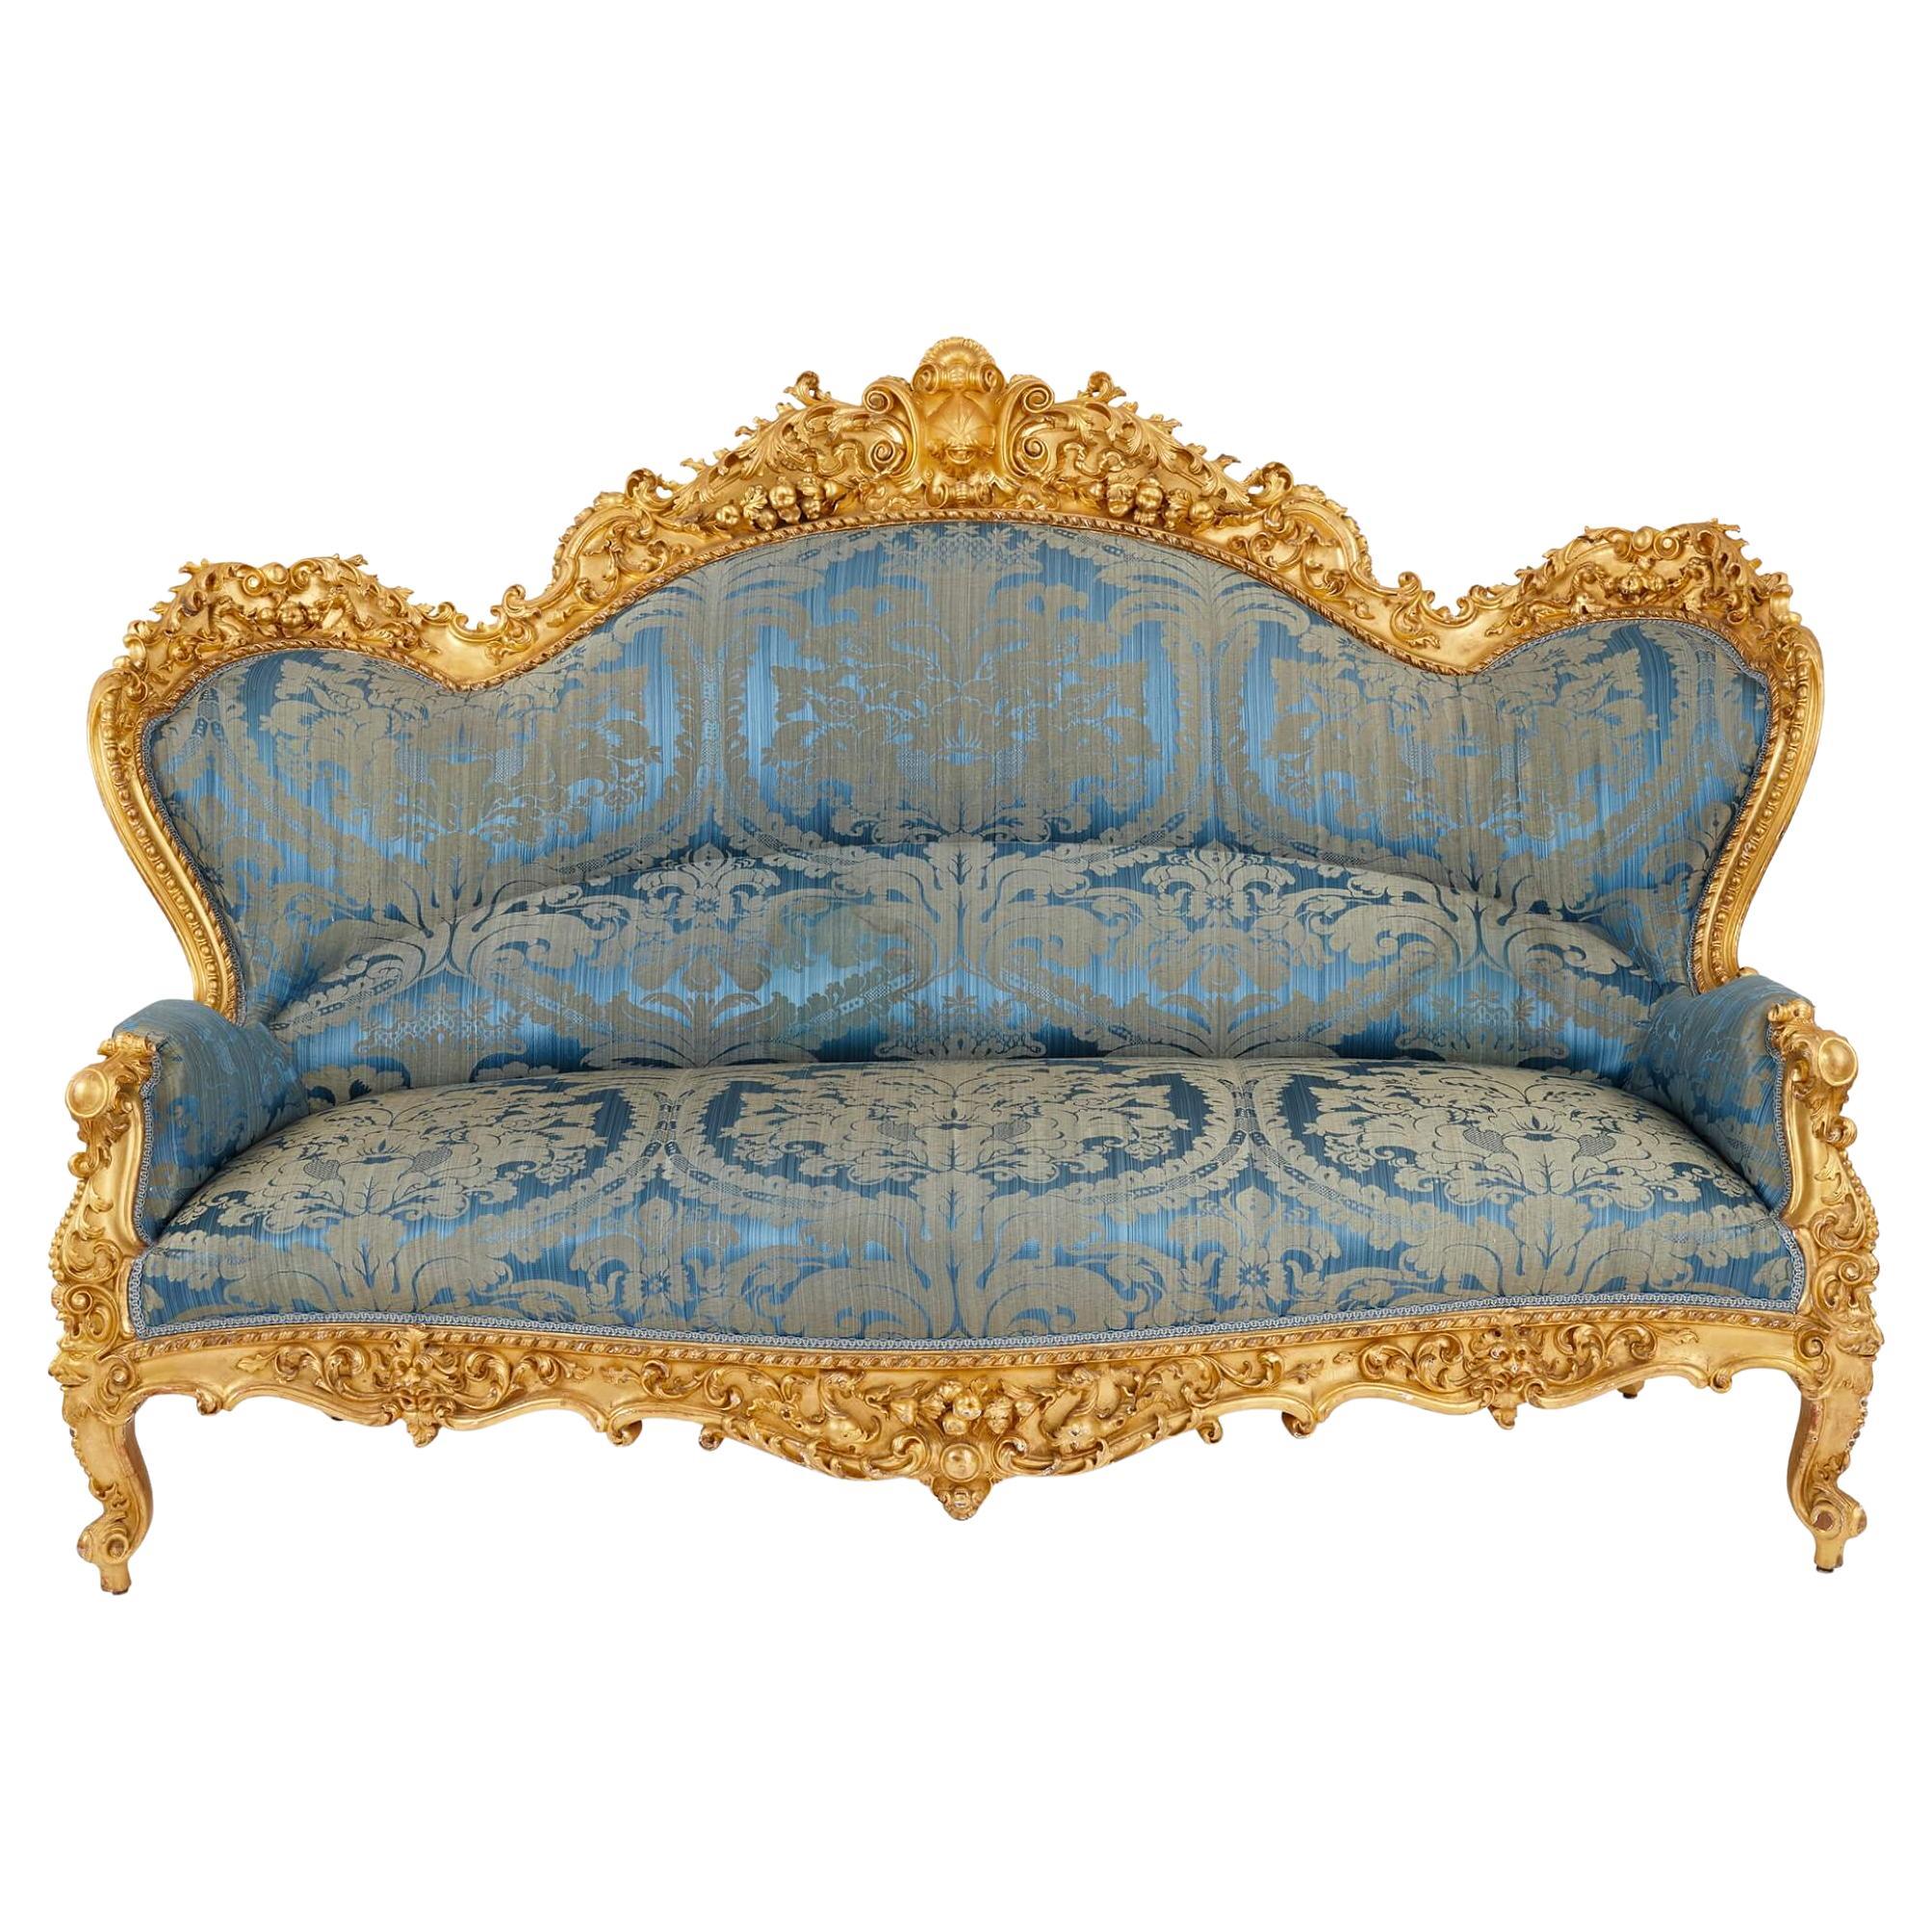 Large French Rococo Revival Style Giltwood Sofa